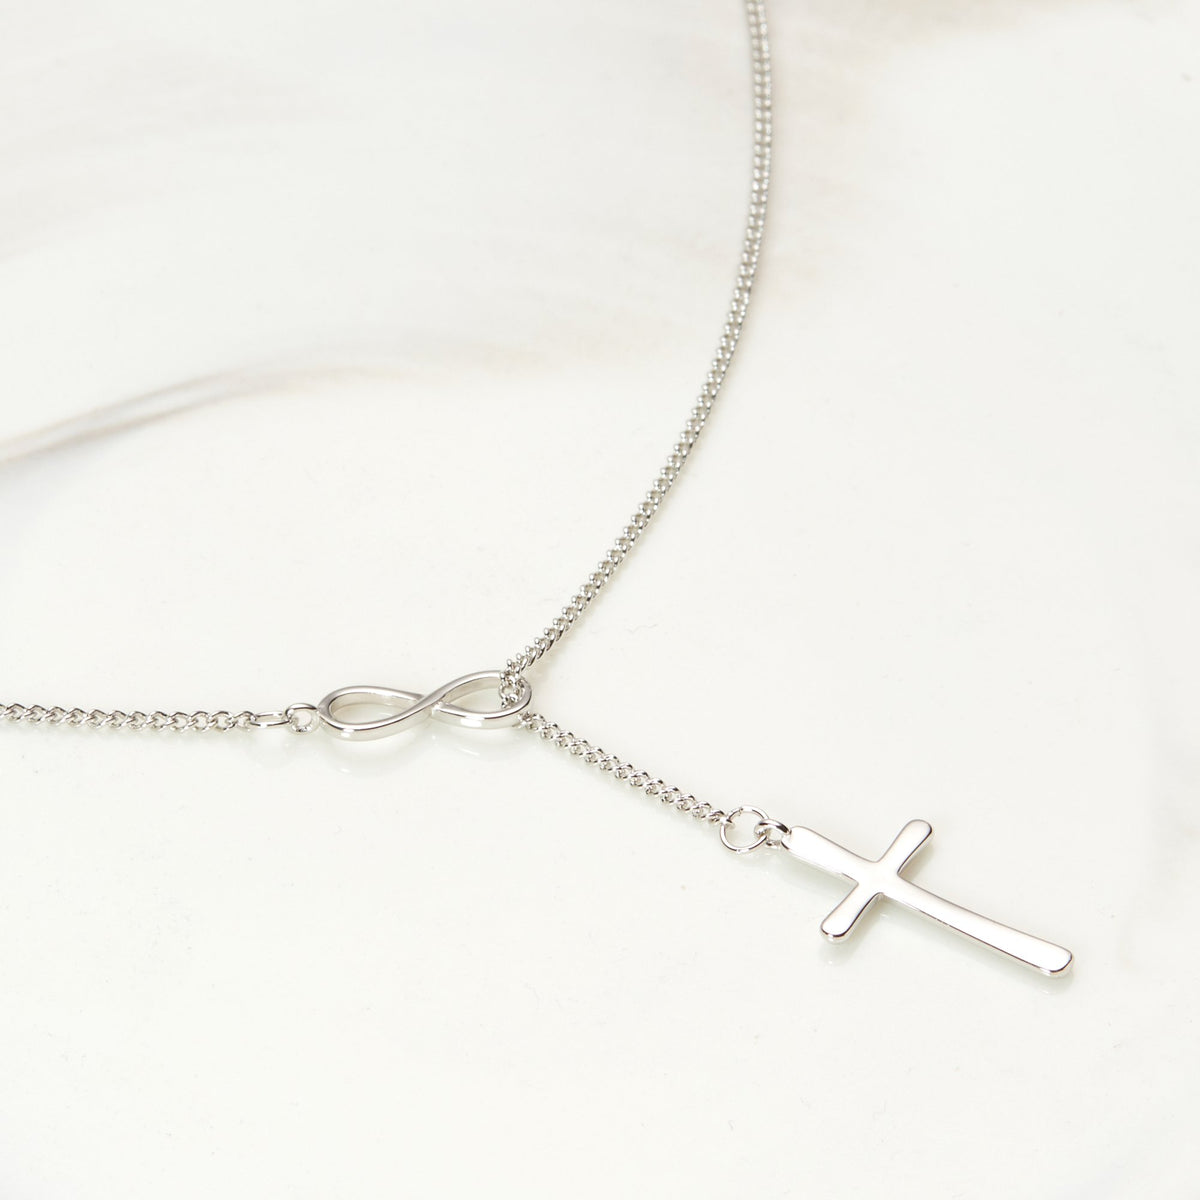 Recovery Infinity Cross  Necklace